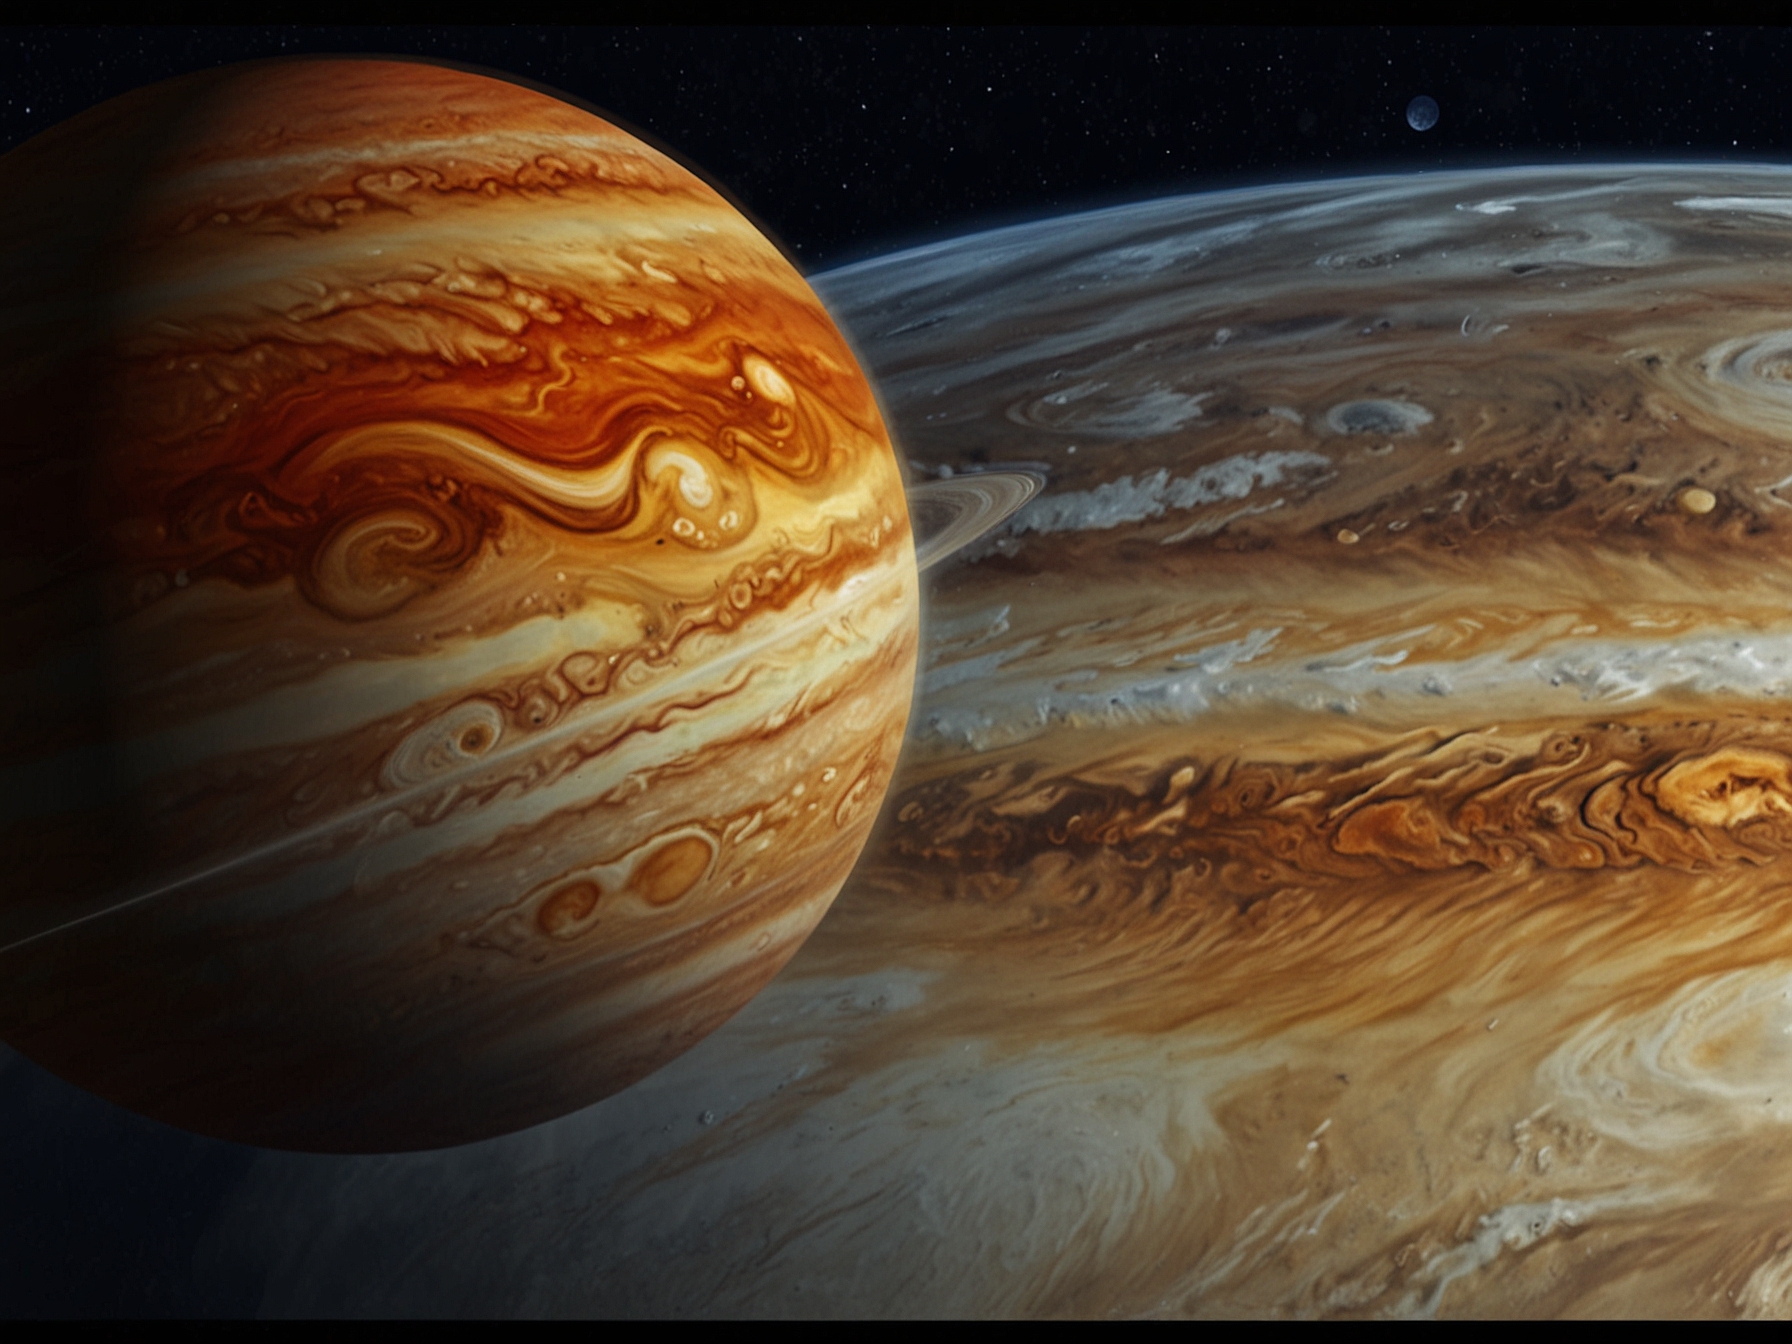 A comparative graphic showing the size of the Great Red Spot relative to Earth. The image emphasizes the storm's enormity and its enduring presence on Jupiter's surface.